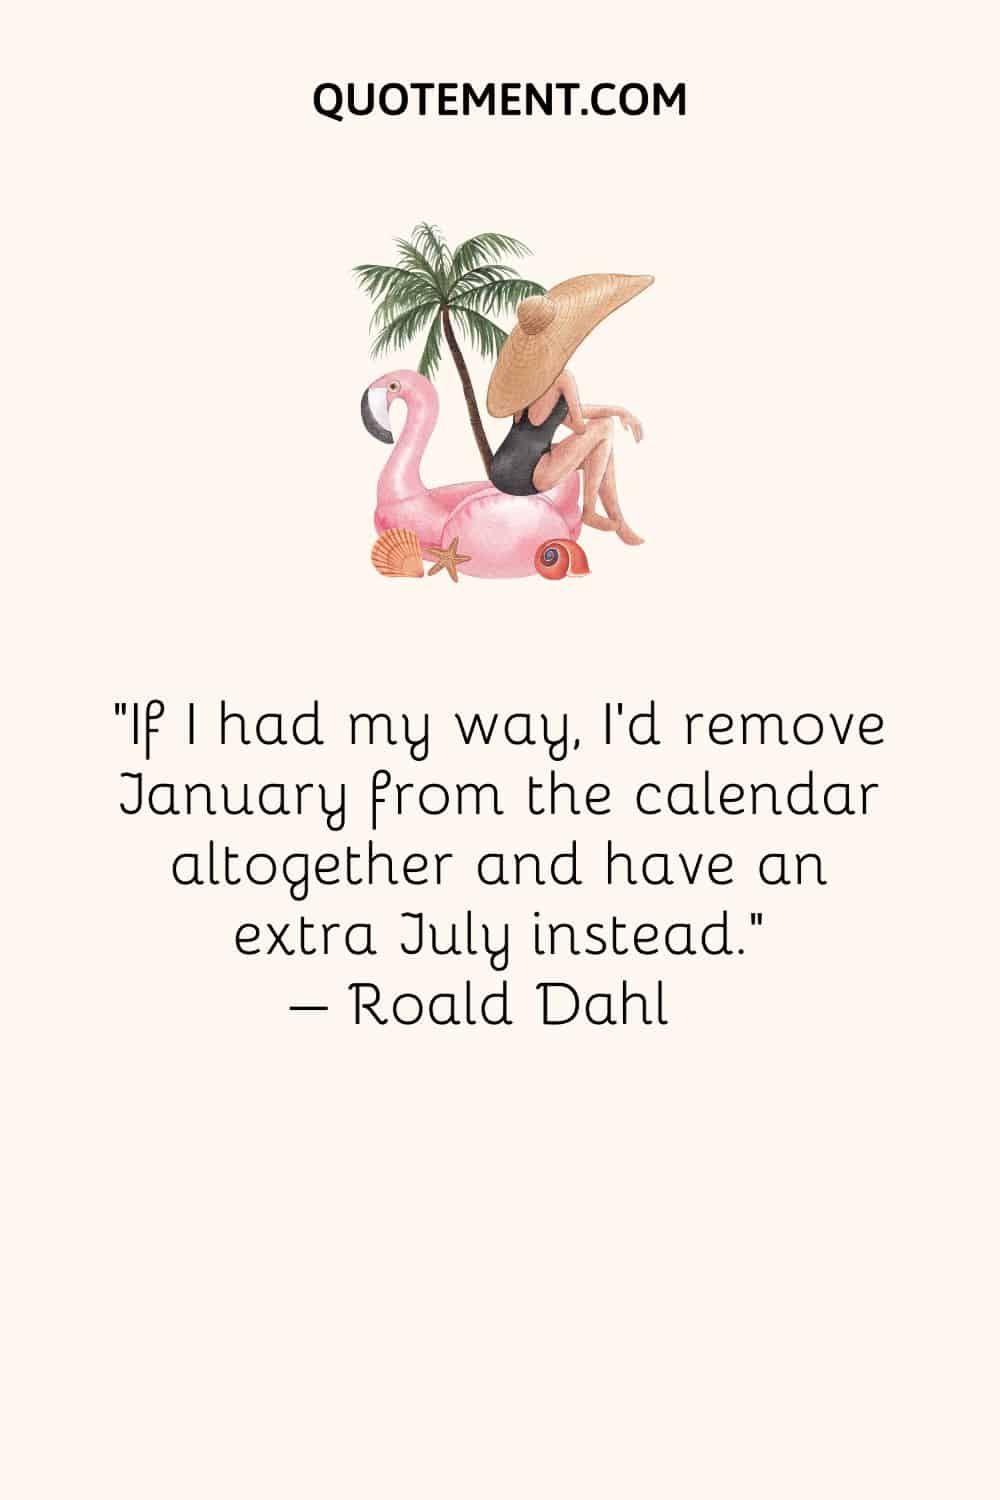 If I had my way, I’d remove January from the calendar altogether and have an extra July instead. – Roald Dahl